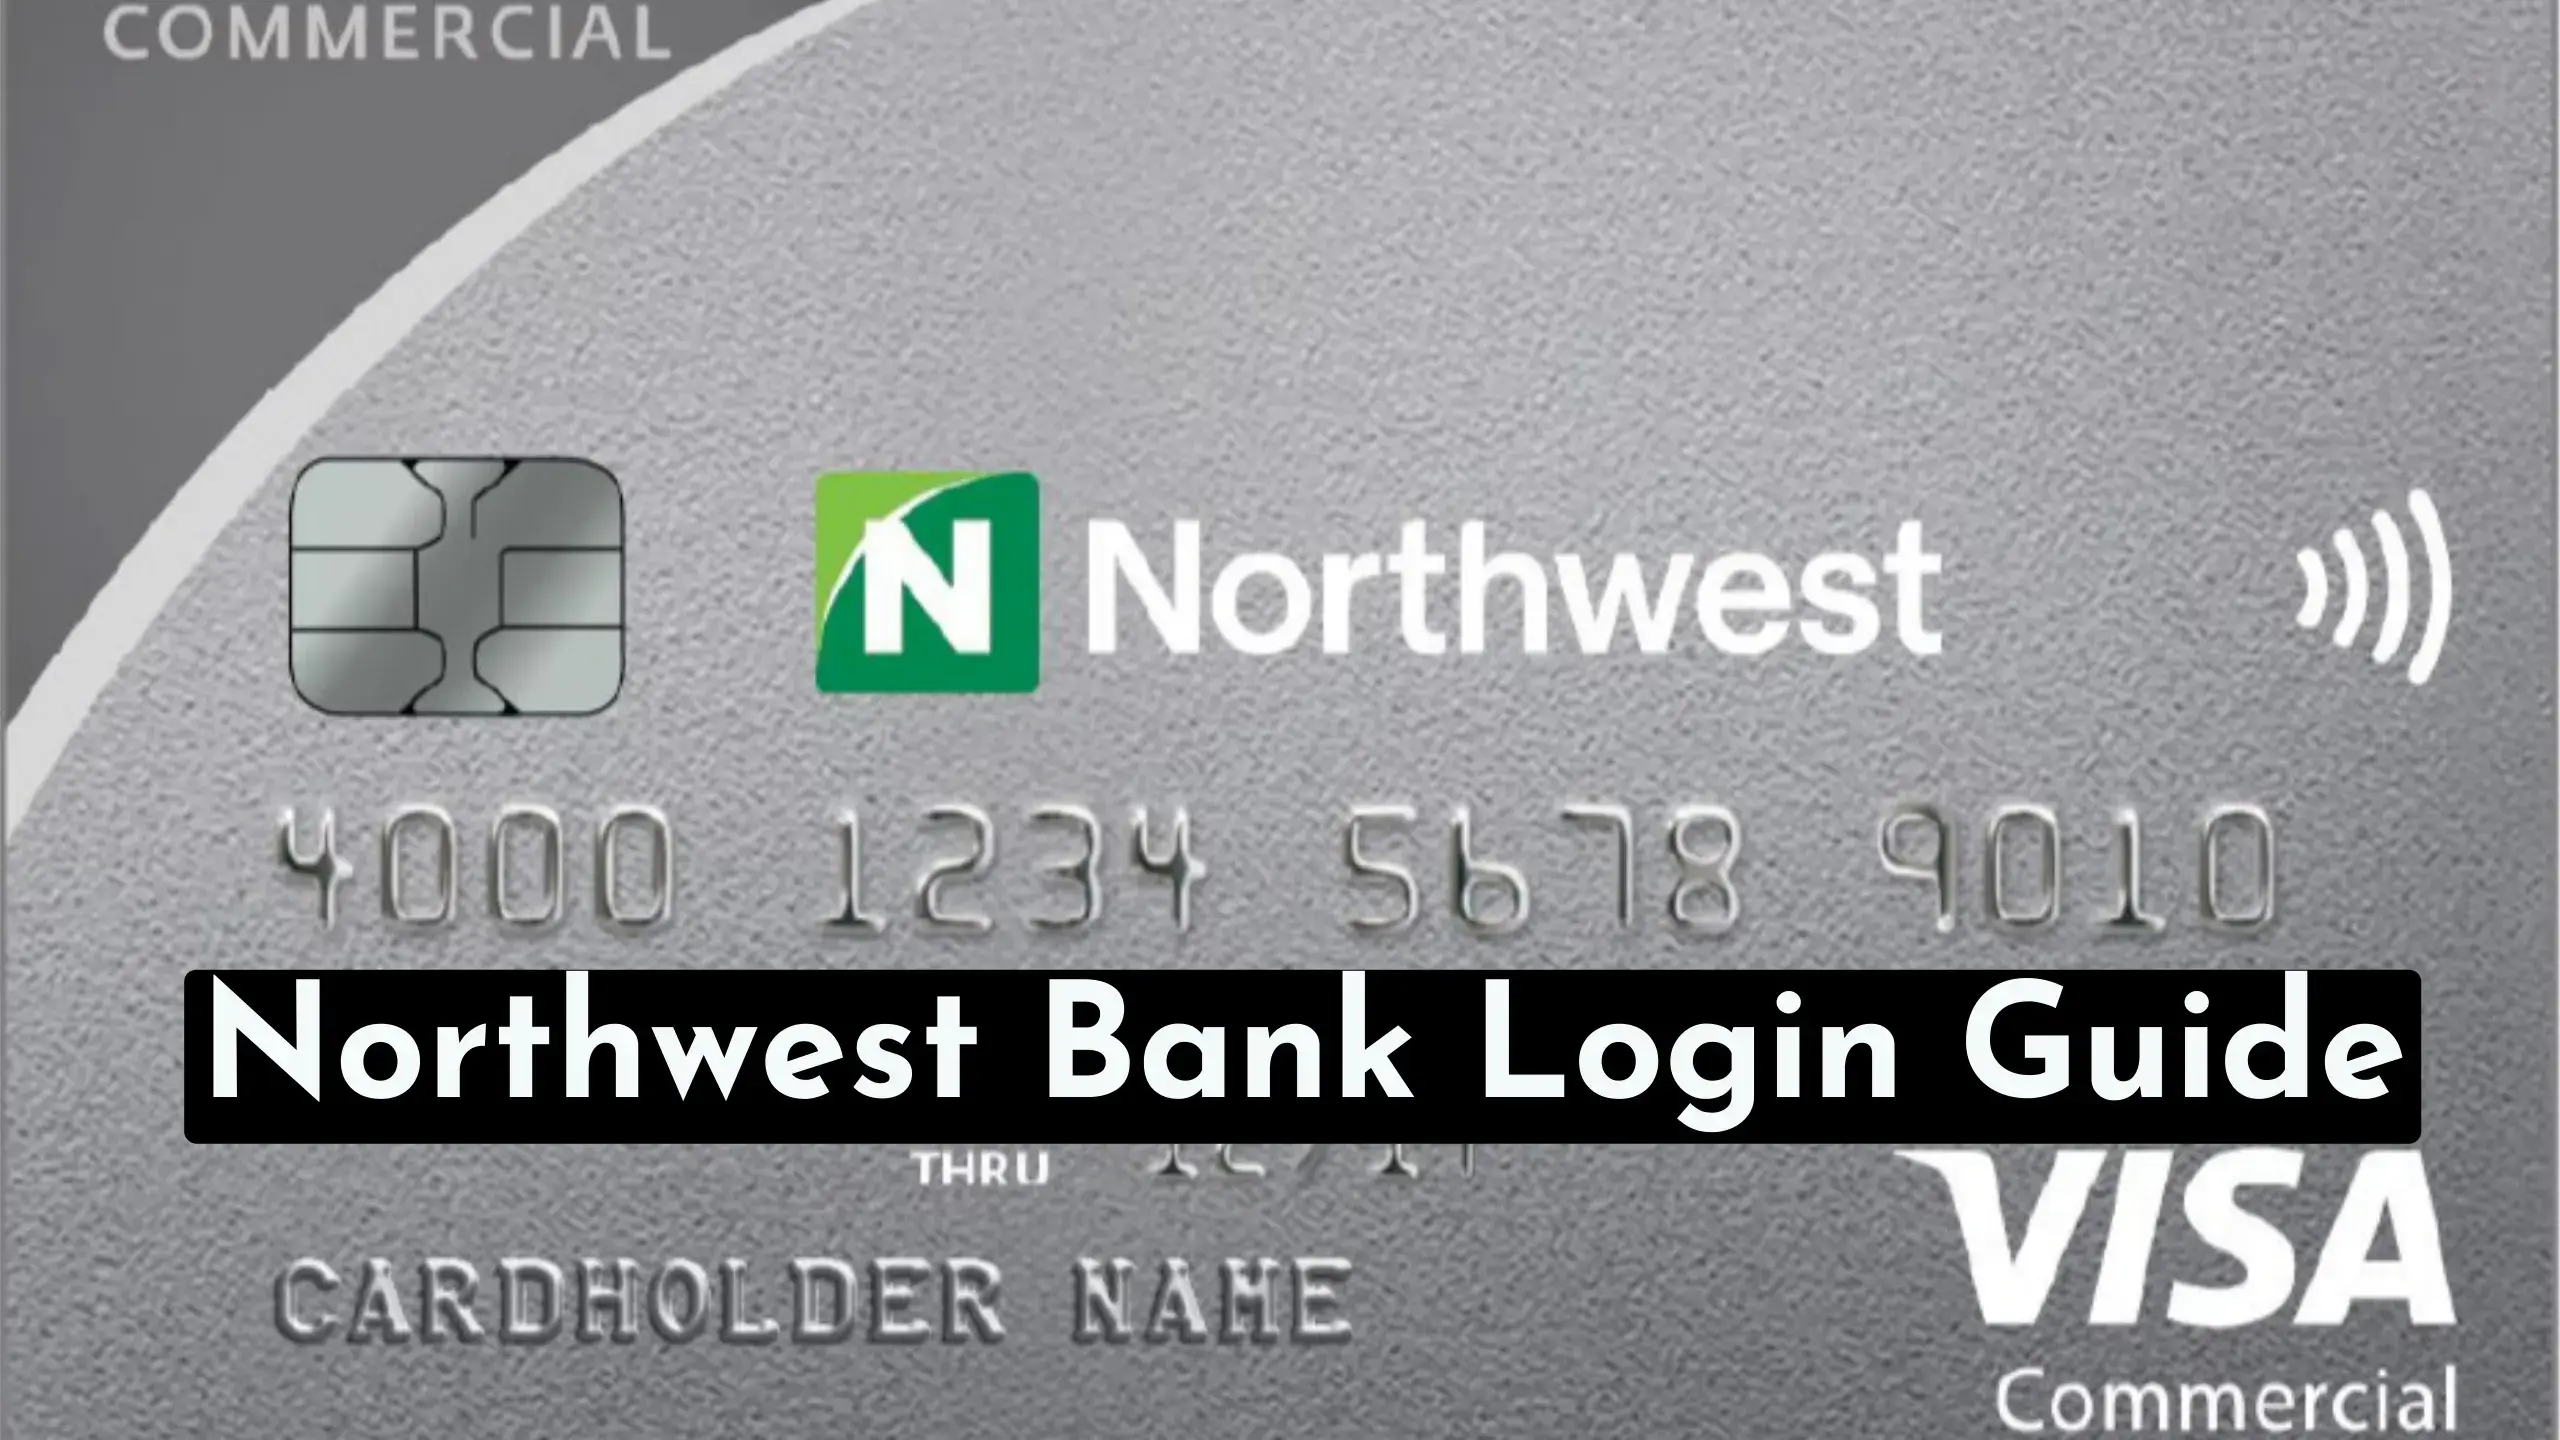 Manage your finances conveniently with Northwest Bank Login Guide . Access your account, make transactions & enjoy secure online banking.